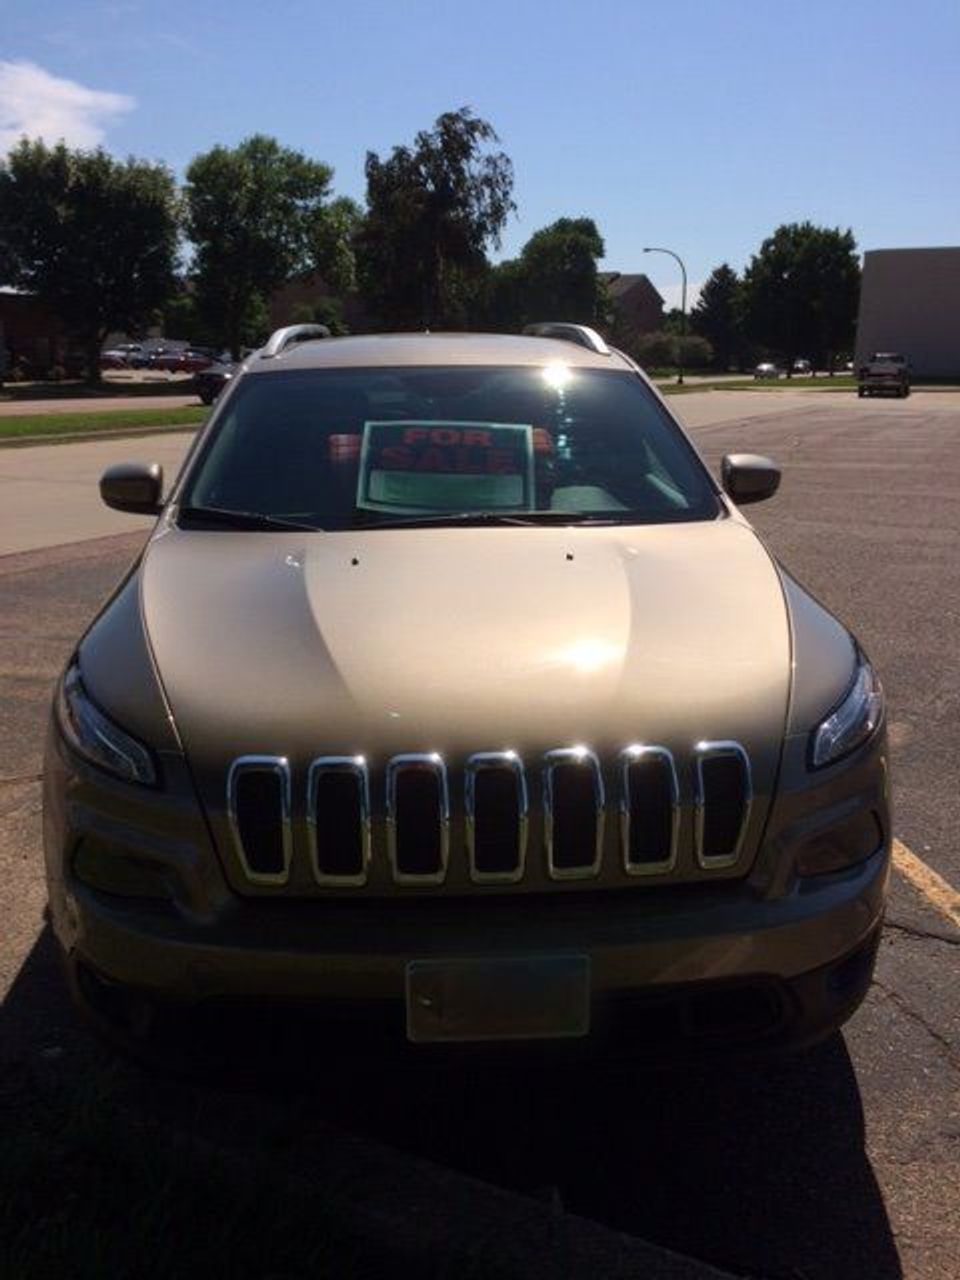 2017 Jeep Cherokee Limited | Sioux Falls, SD, Billet Silver Metallic Clear Coat (Silver), 4x4